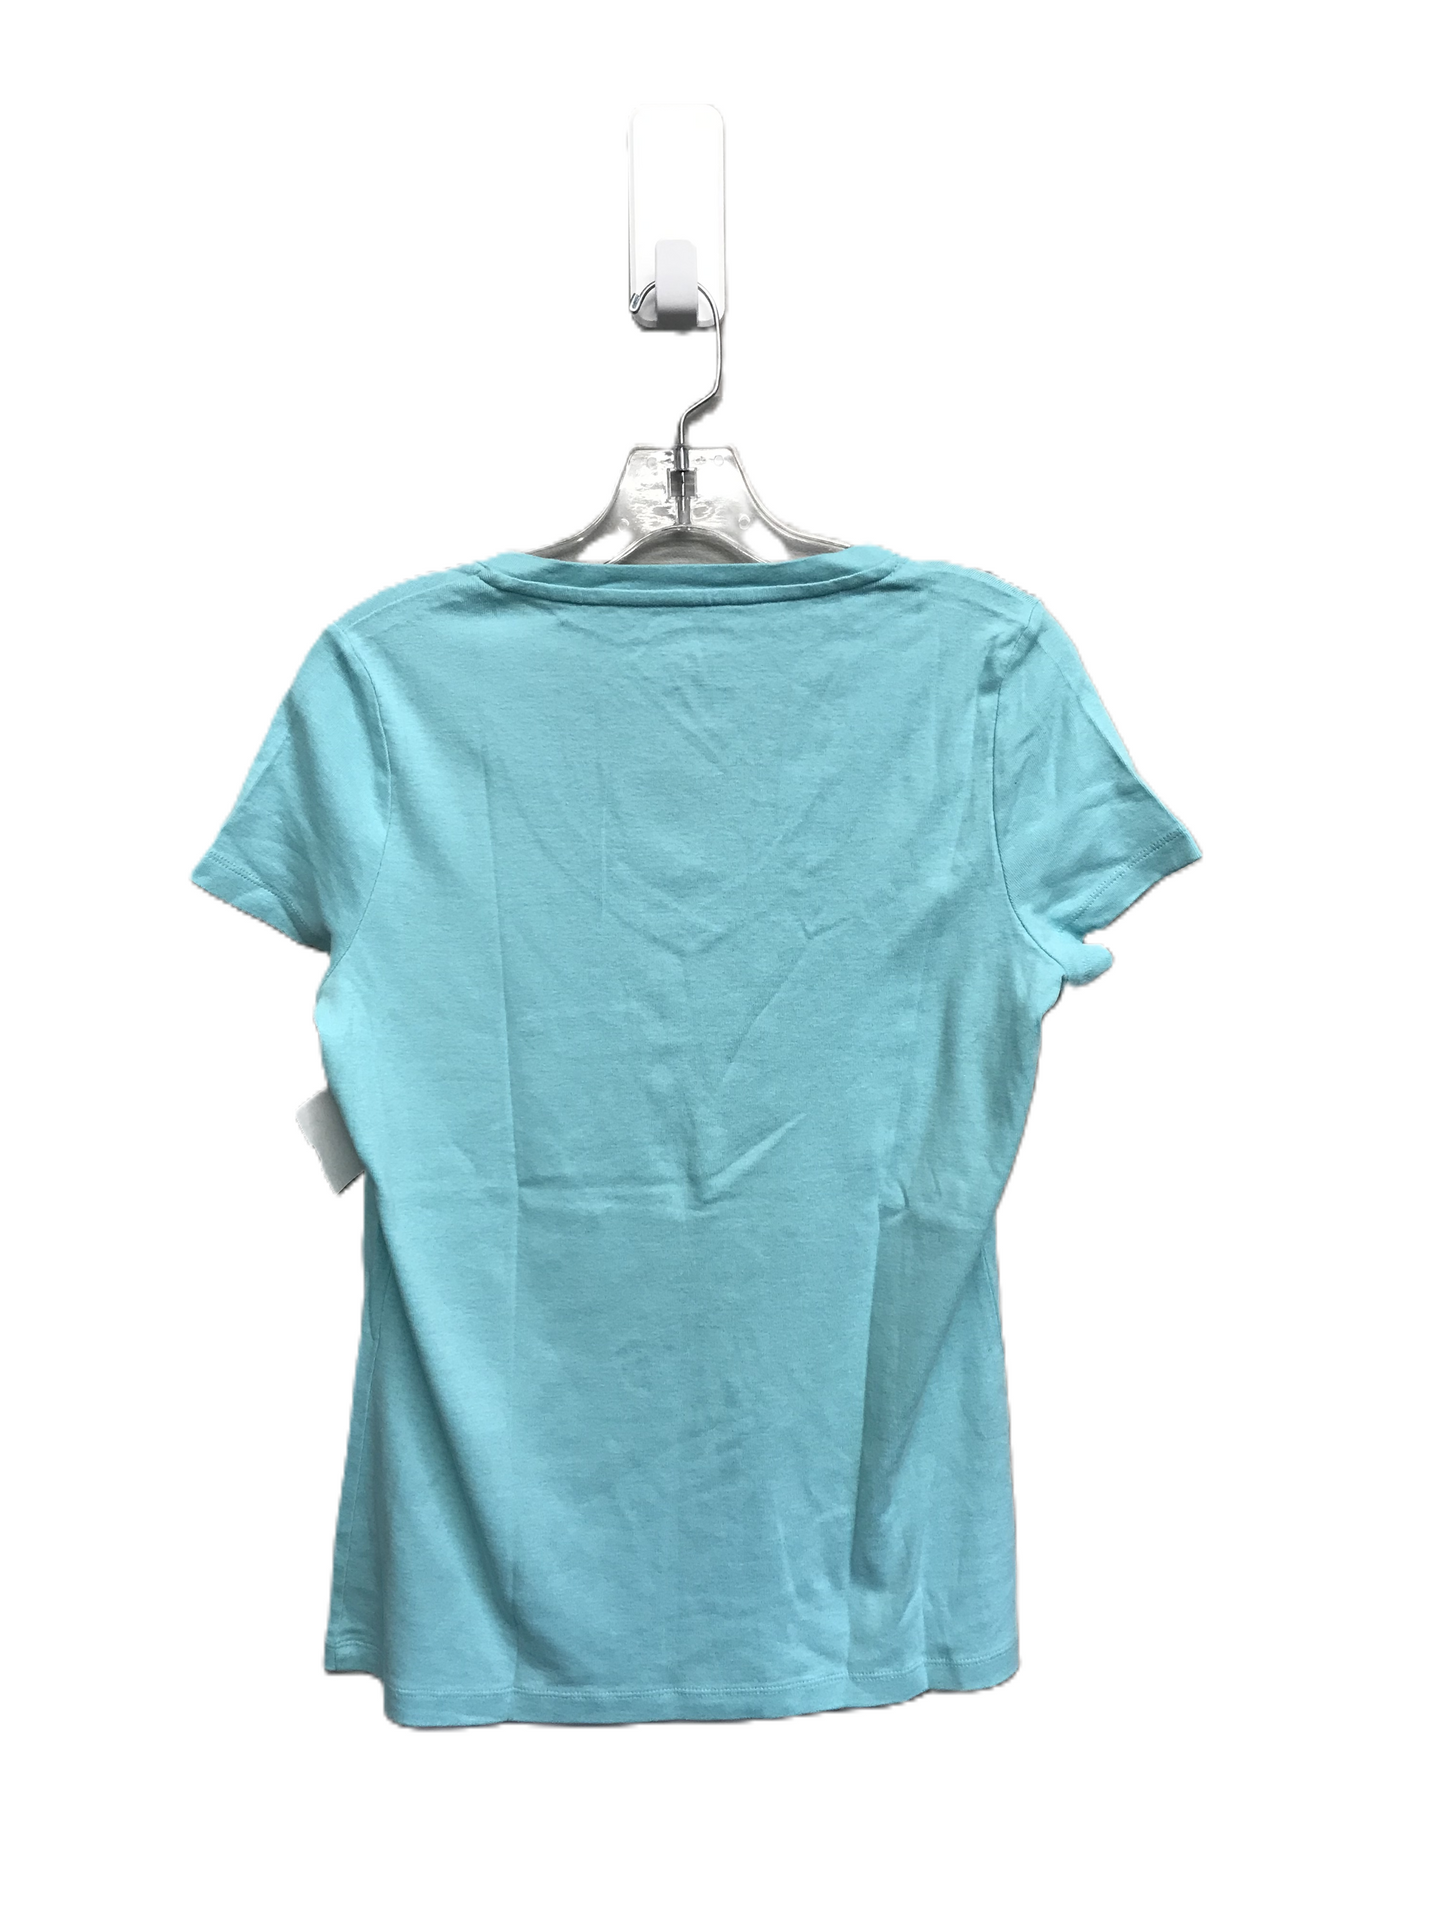 Green Top Short Sleeve Basic By St John Knits, Size: M